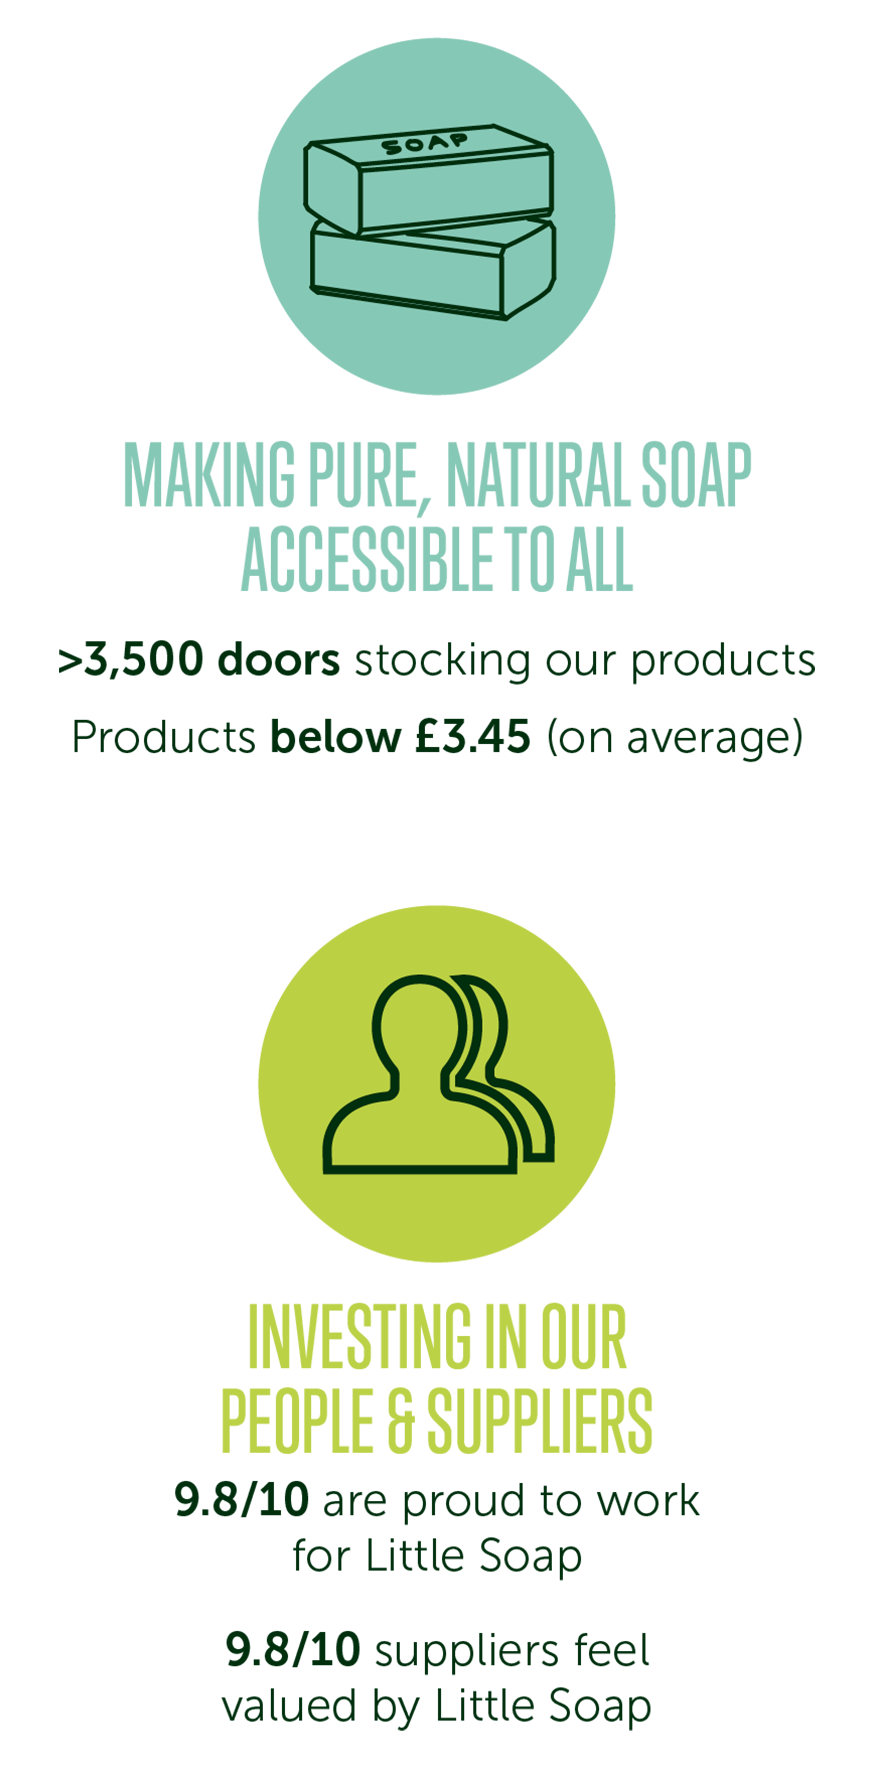 Icon with title of "Making pure, natural soap accessible to all" with sub-points including ">3,500 doors stocking our products" and "Products below £3.45 (on average|" and another icon with title "Investing in our People & Suppliers" with sub-points including "9.8/10 are proud to work for Little Soap" and "9.8/10 suppliers feel valued by Little Soap"